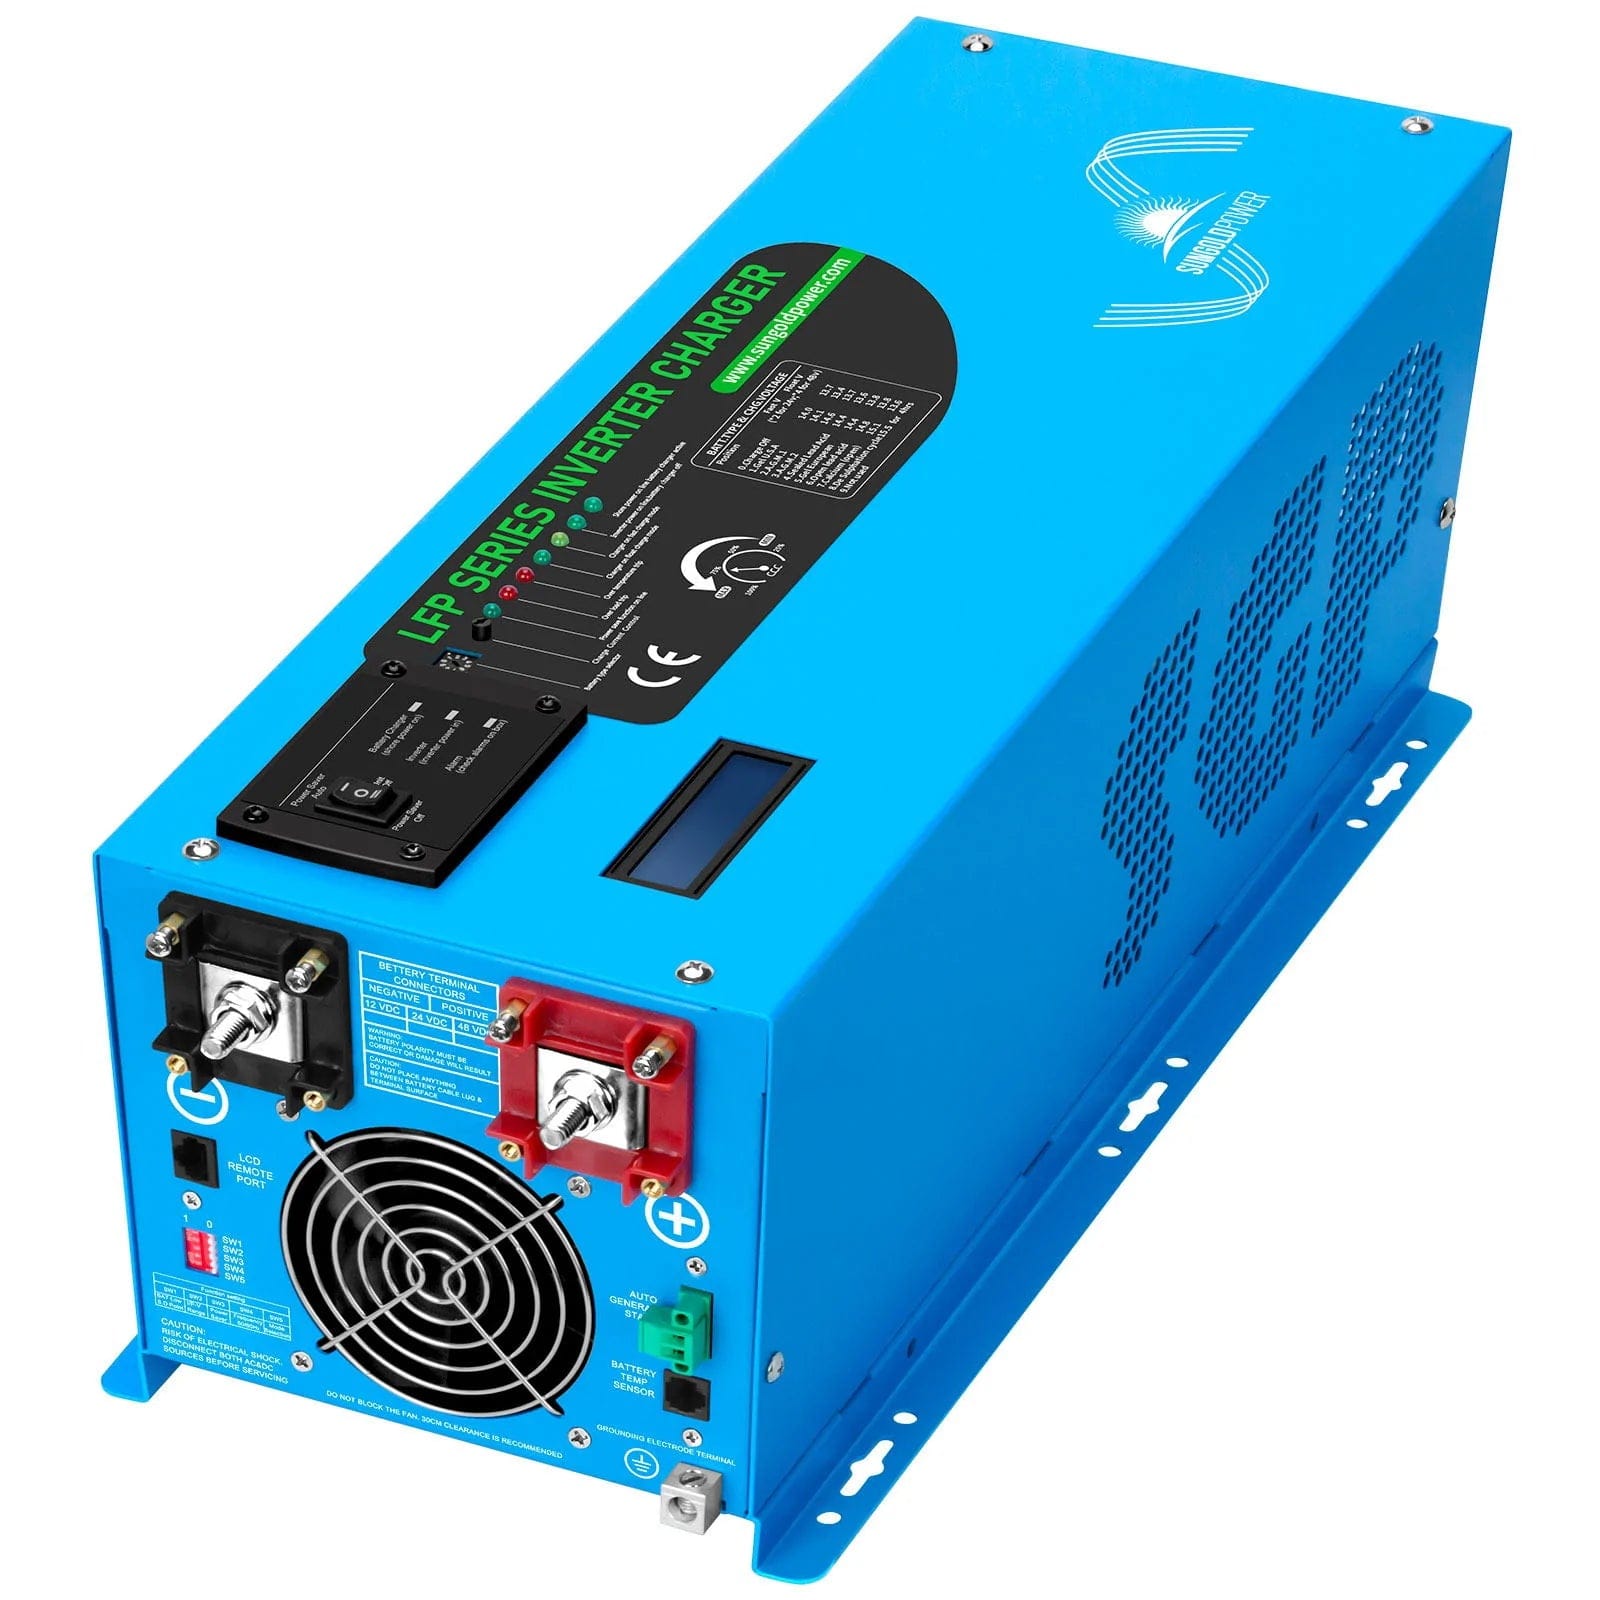 SunGoldPower 3000W DC 24V Pure Sine Wave Inverter with Charger